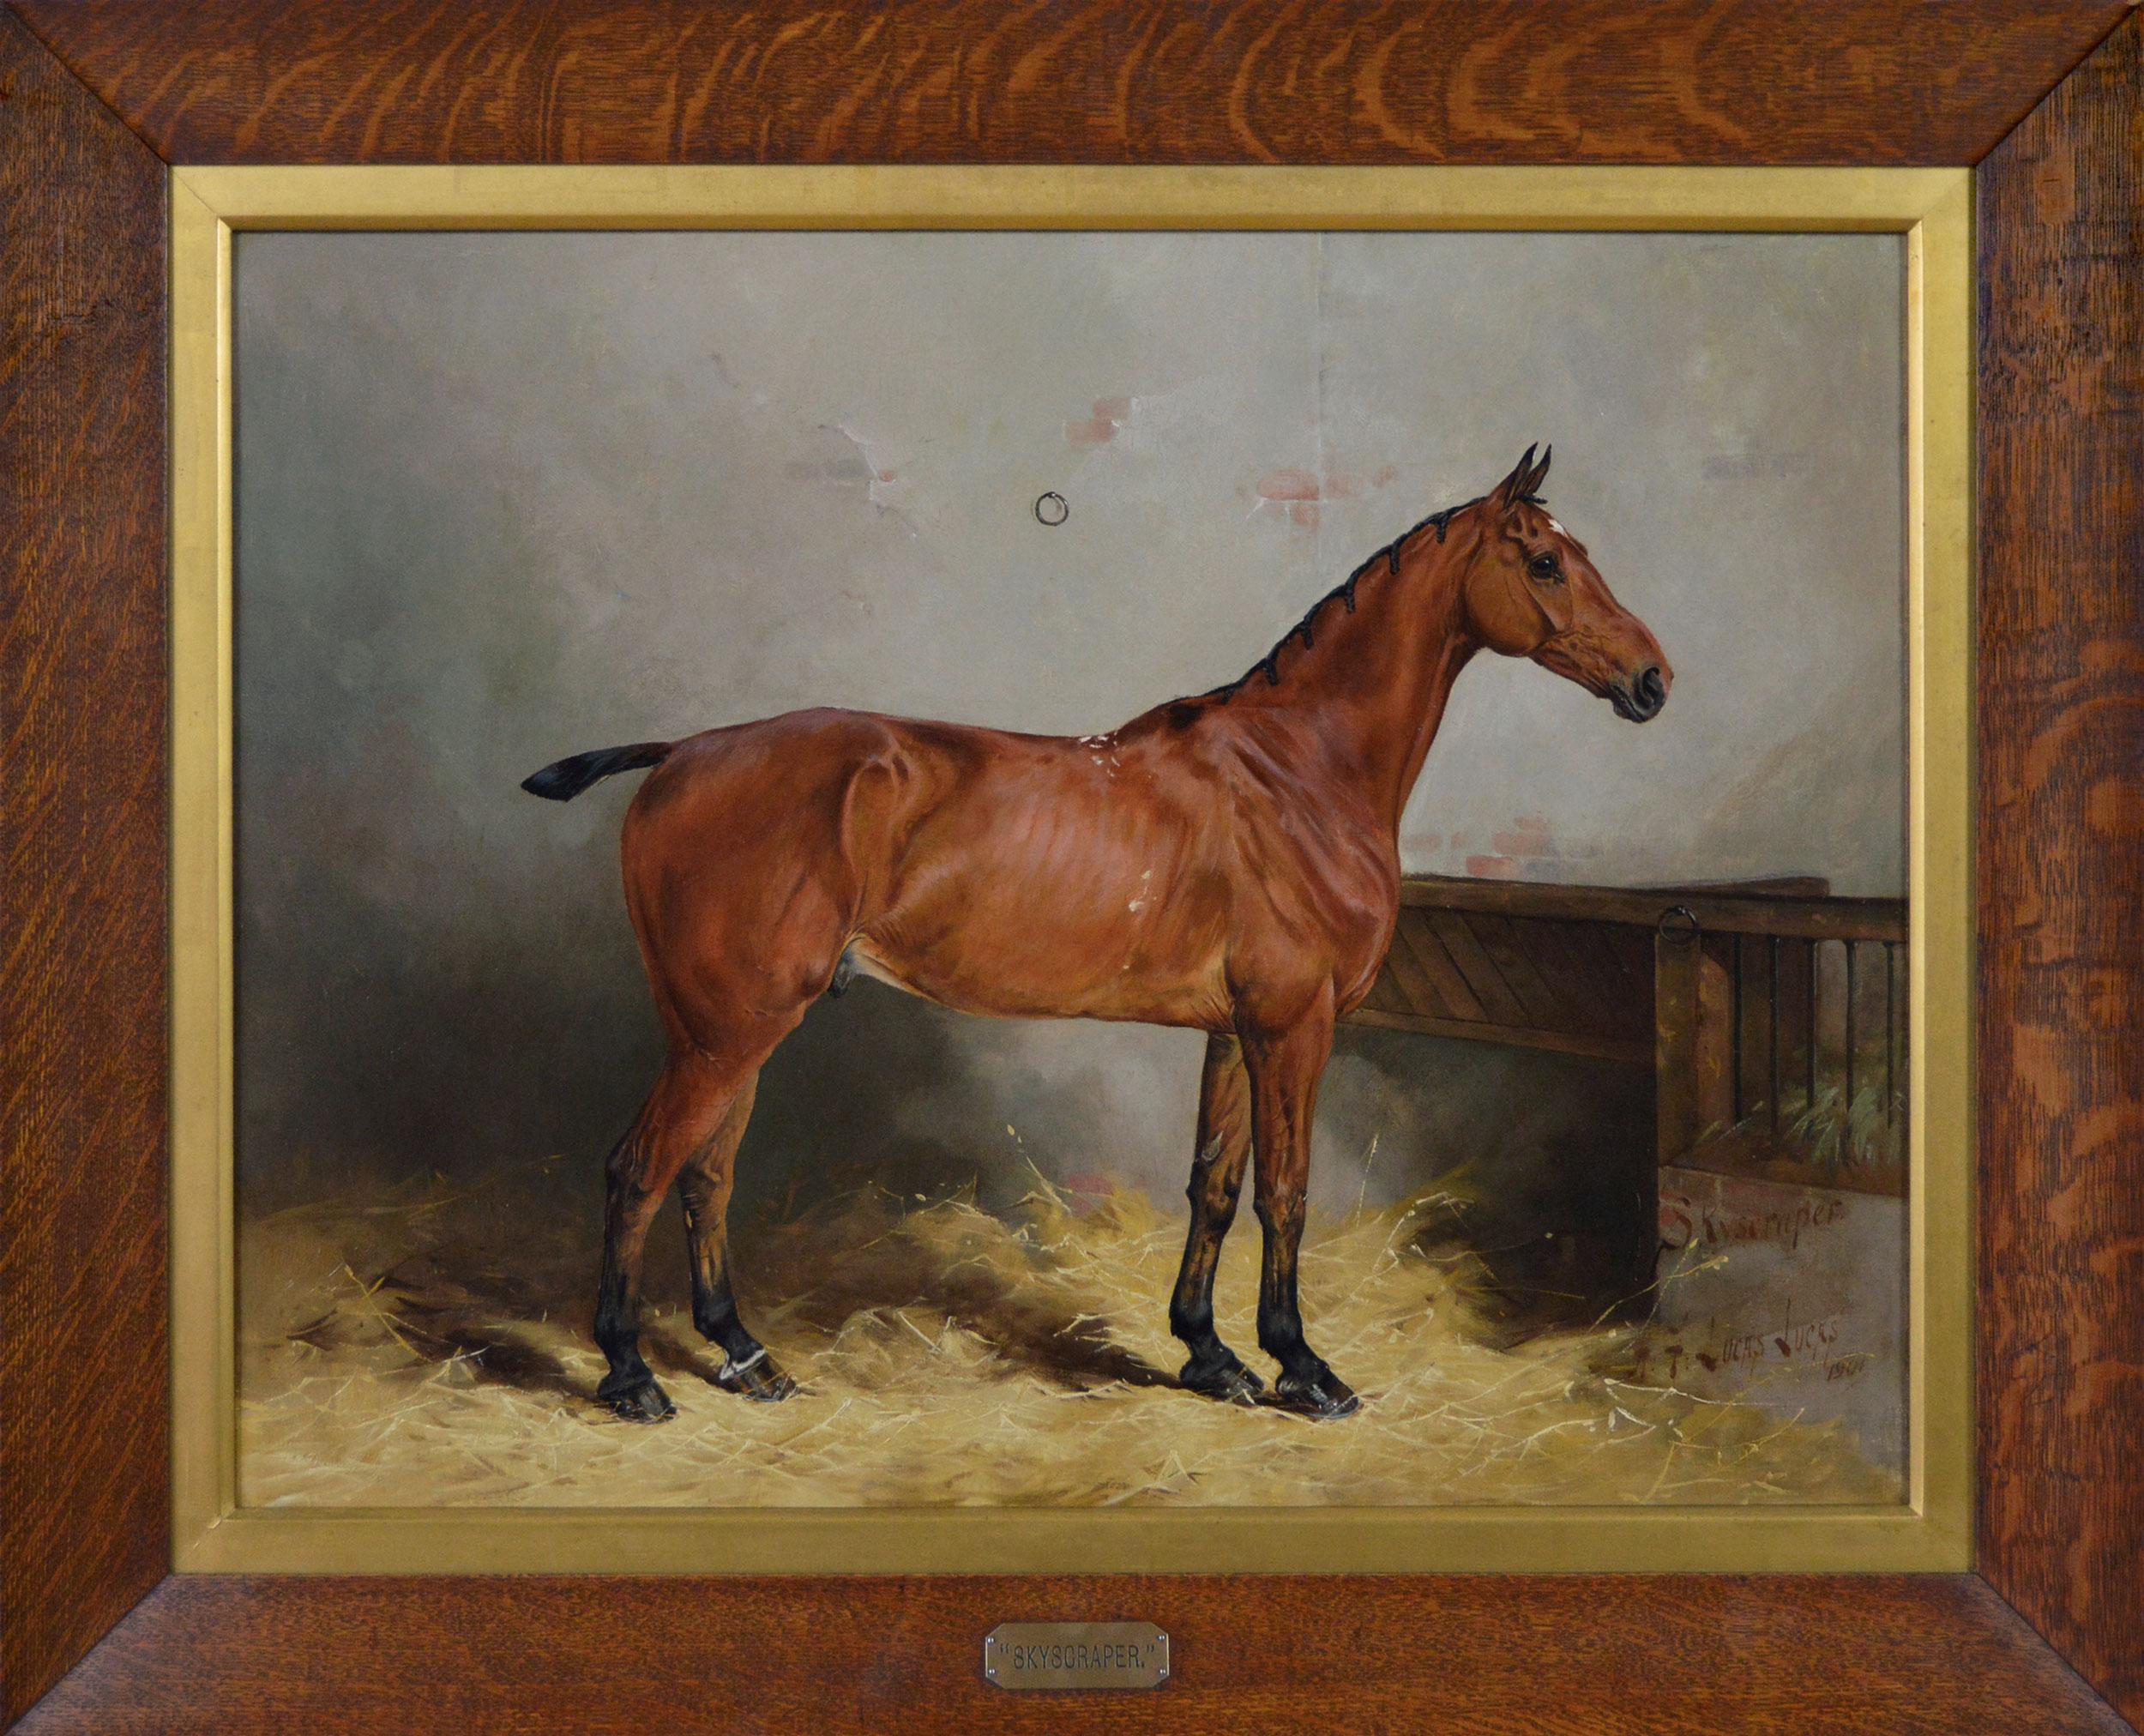 Henry Frederick Lucas Lucas  Animal Painting - Horse portrait oil painting of a prize winning bay stallion